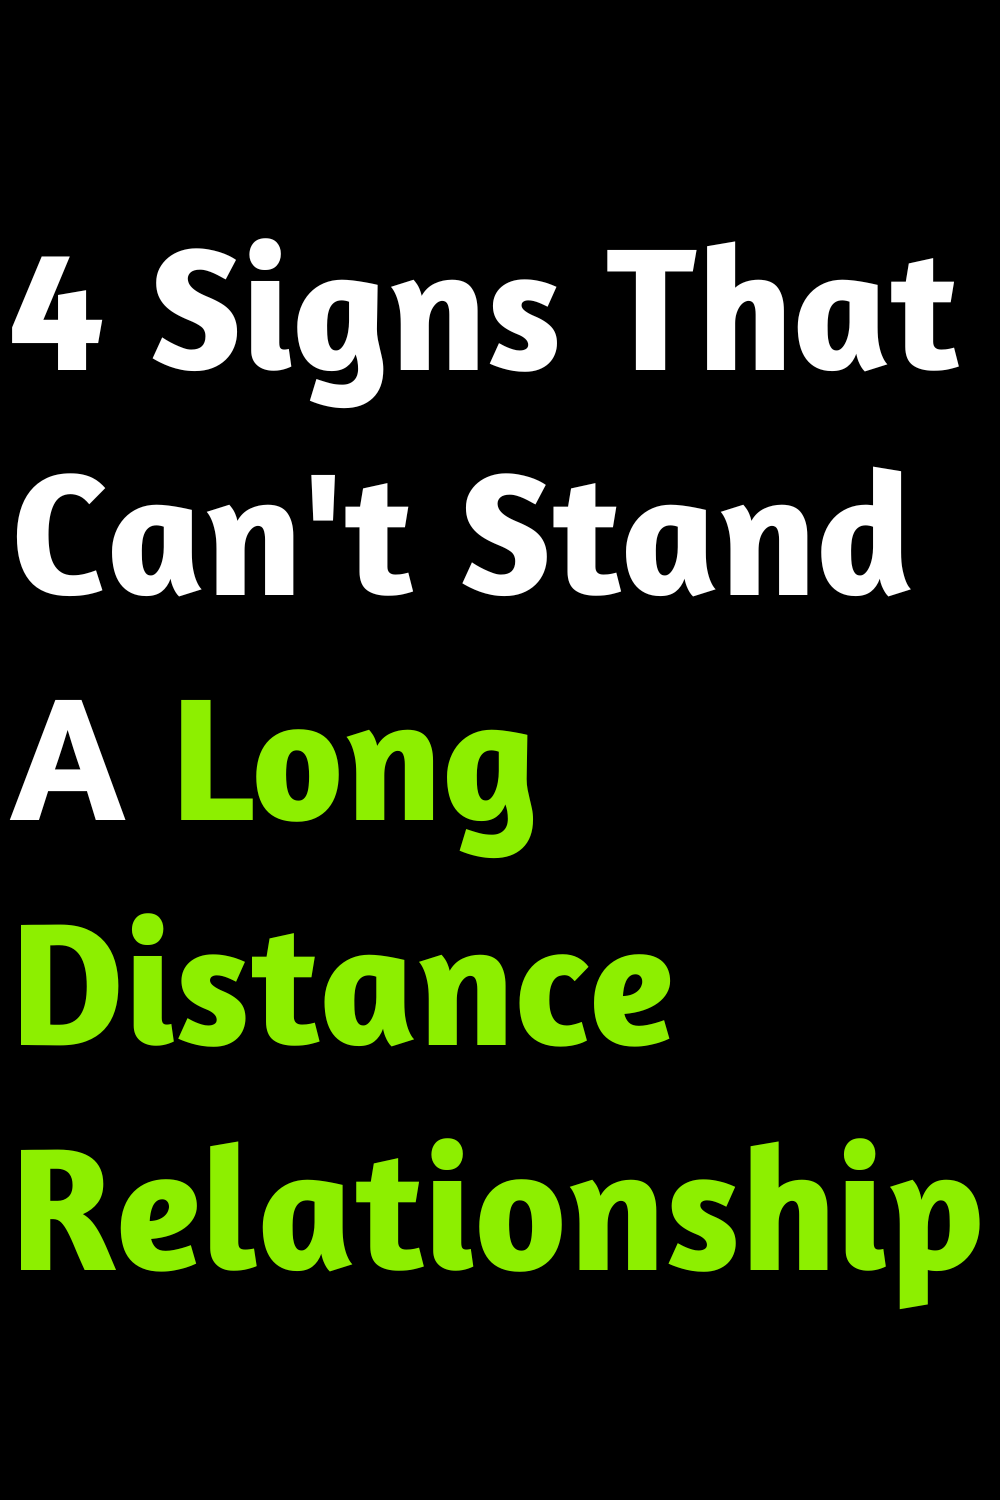 4 Signs That Can't Stand A Long Distance Relationship